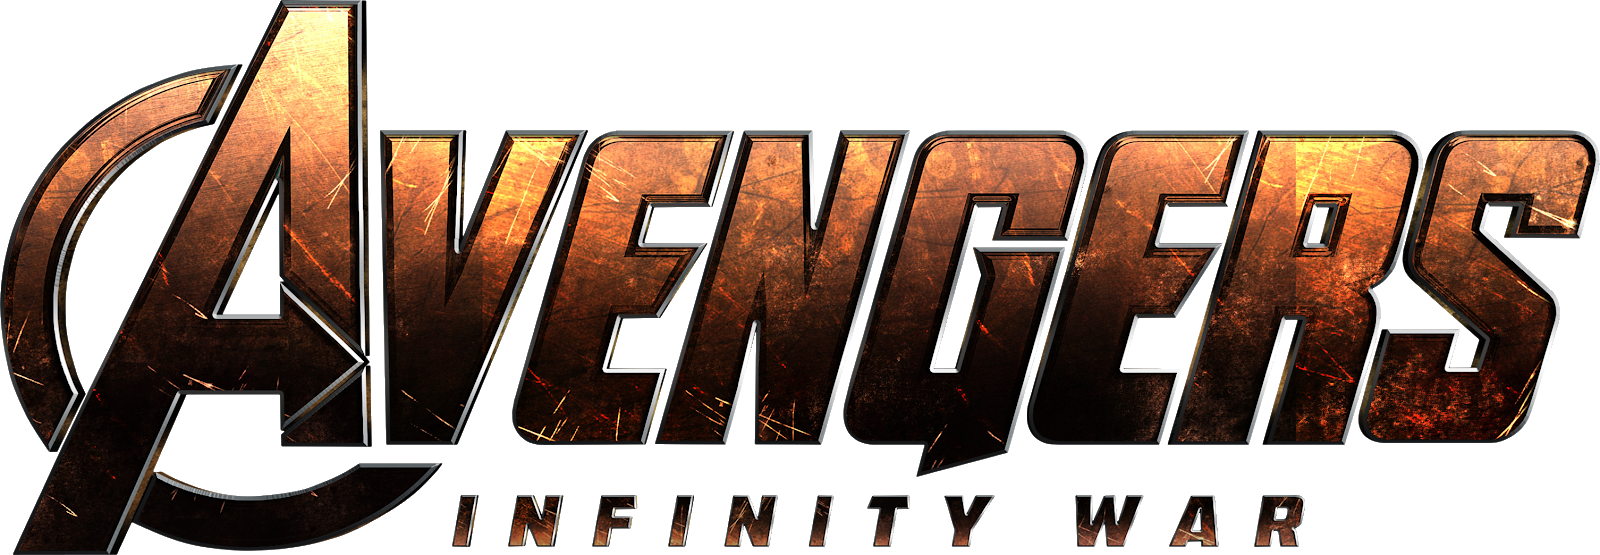 AVENGERS: INFINITY WAR - 2 Logos PNG 2 - Textless Movies